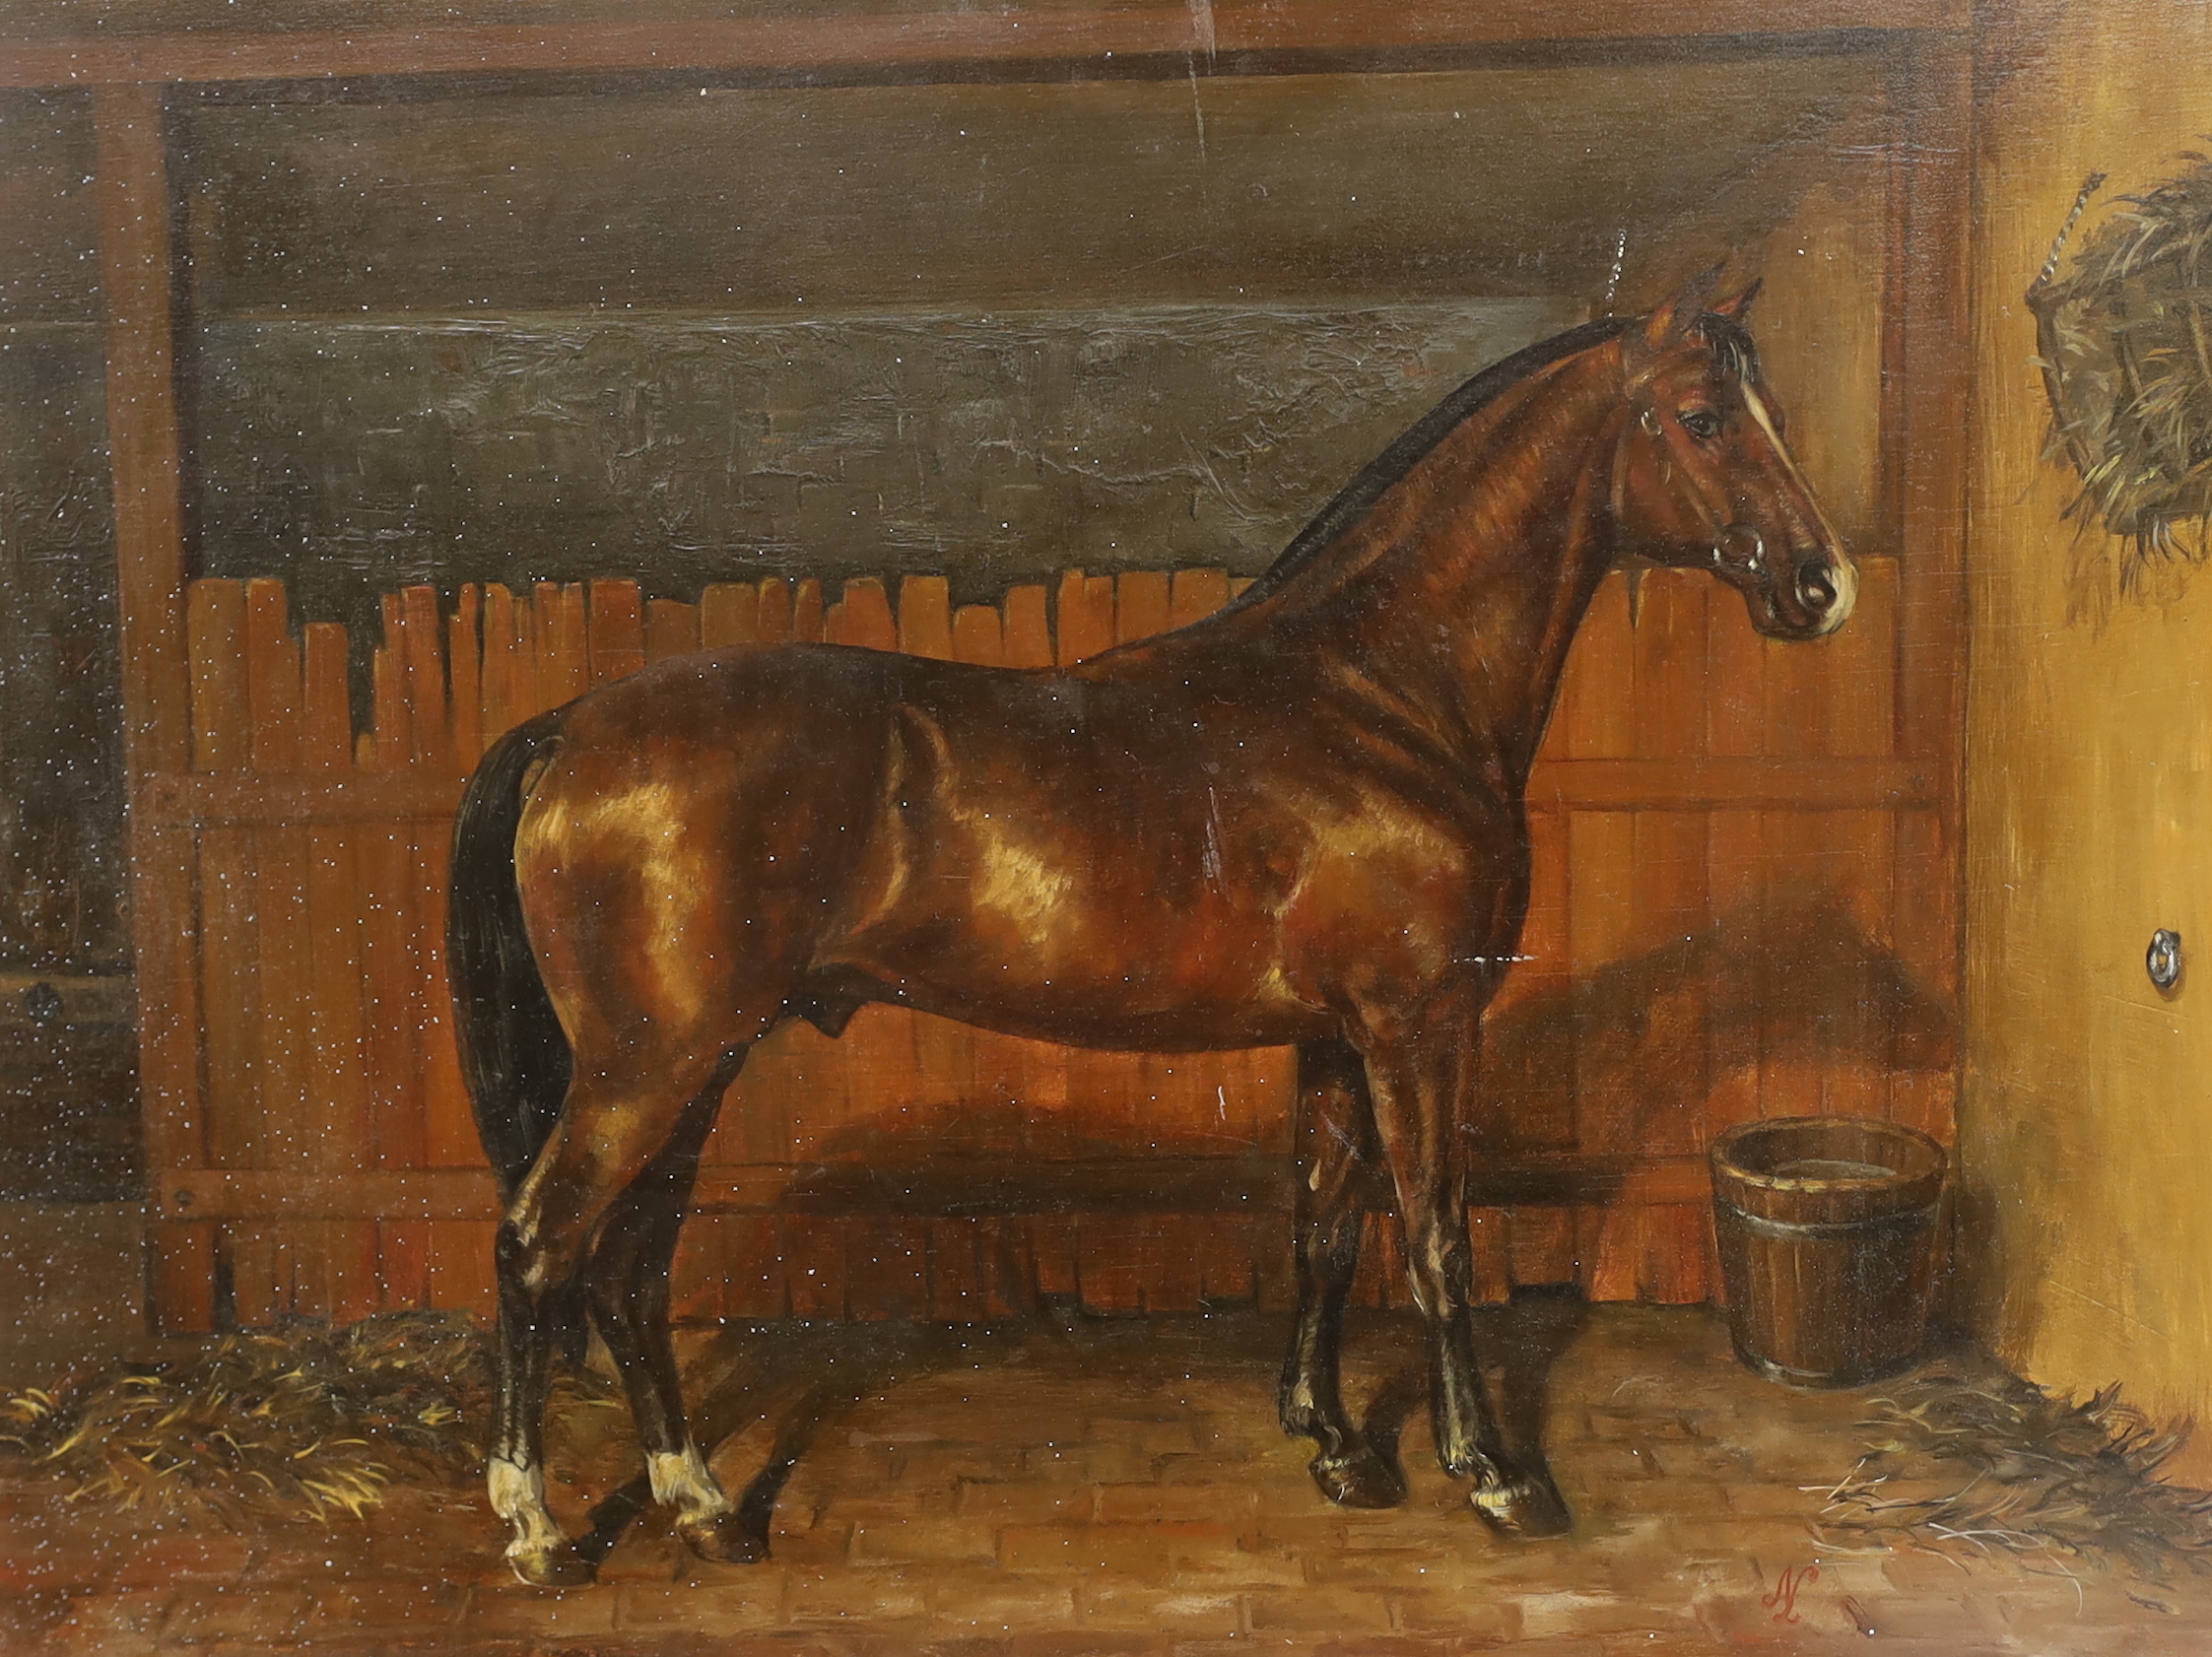 K. M. Nadler (20th. C), oil on board, Study of a bay horse in a stable, signed, 31 x 40cm, unframed